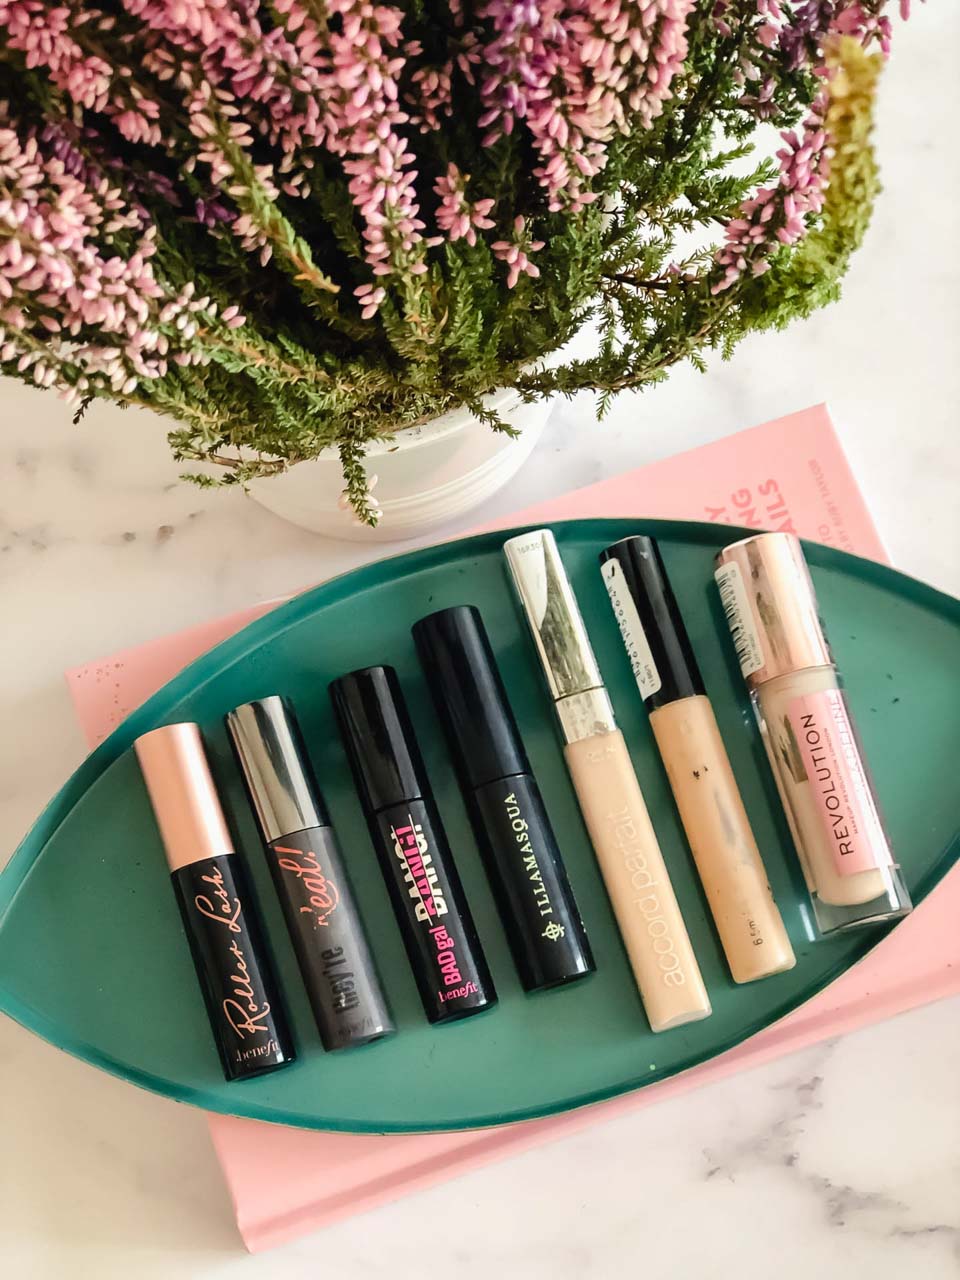 Makeup products displayed on a marble desk in front of a heather plant